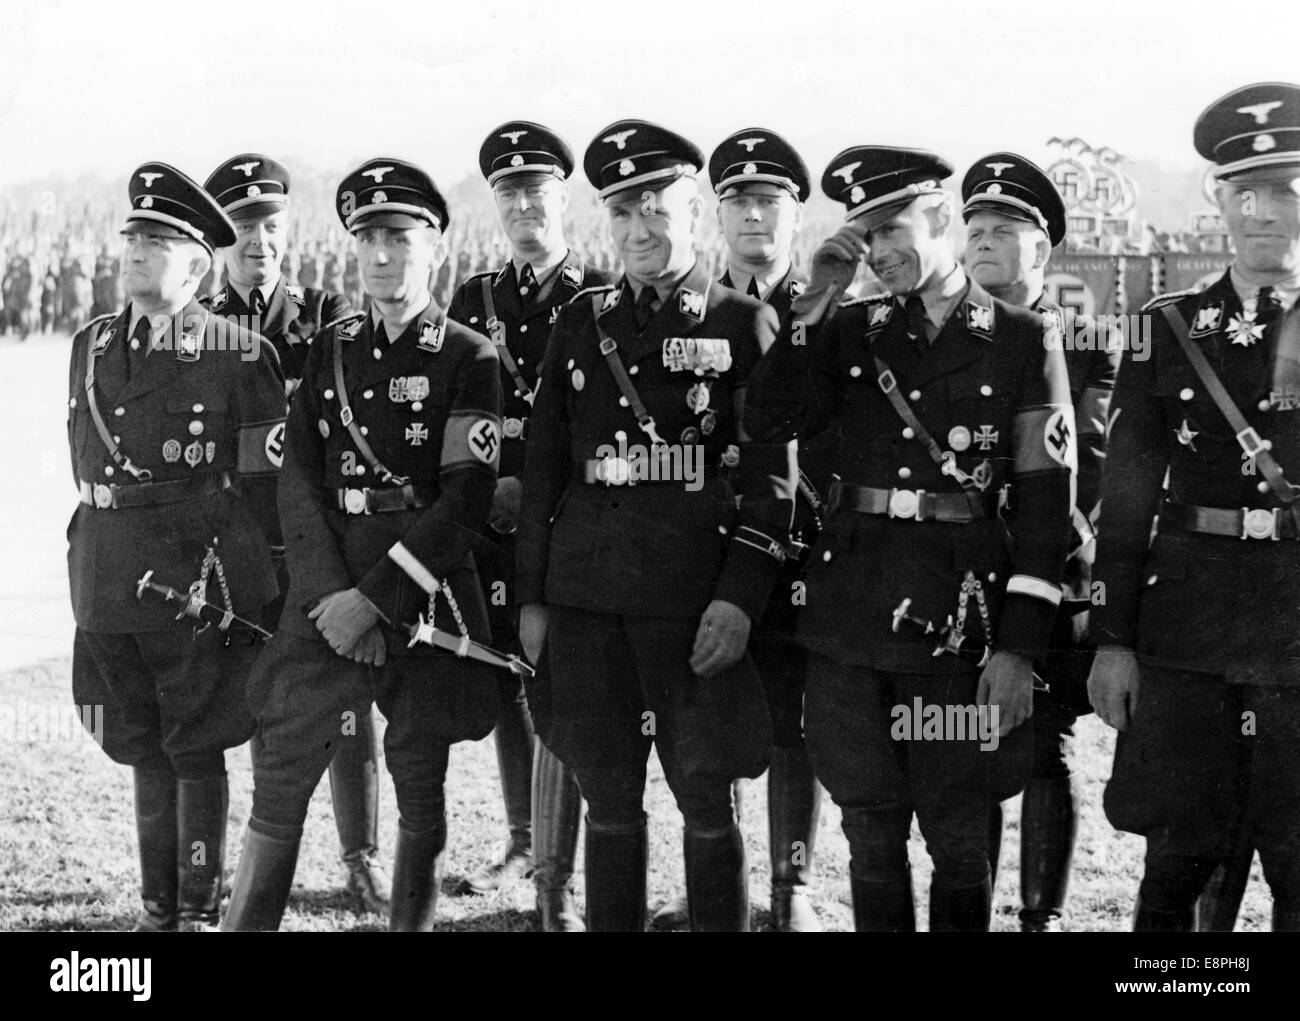 Nuremberg Rally 1937 in Nuremberg, Germany - Nazi party rally grounds - SS-Obergruppenfuehrer and Munich's chief of police Karl von Eberstein (2nd row, left) and SS-Gruppenfuehrer Theodor Berkelmann during the roll call of the Sturmabteilung (SA), Schutzstaffel (SS), National Socialist Motor Corps (NSKK) and National Socialist Flyers Corps (NSFK) at Luitpold arena. (Flaws in quality due to the historic picture copy) Fotoarchiv für Zeitgeschichtee - NO WIRE SERVICE - Stock Photo